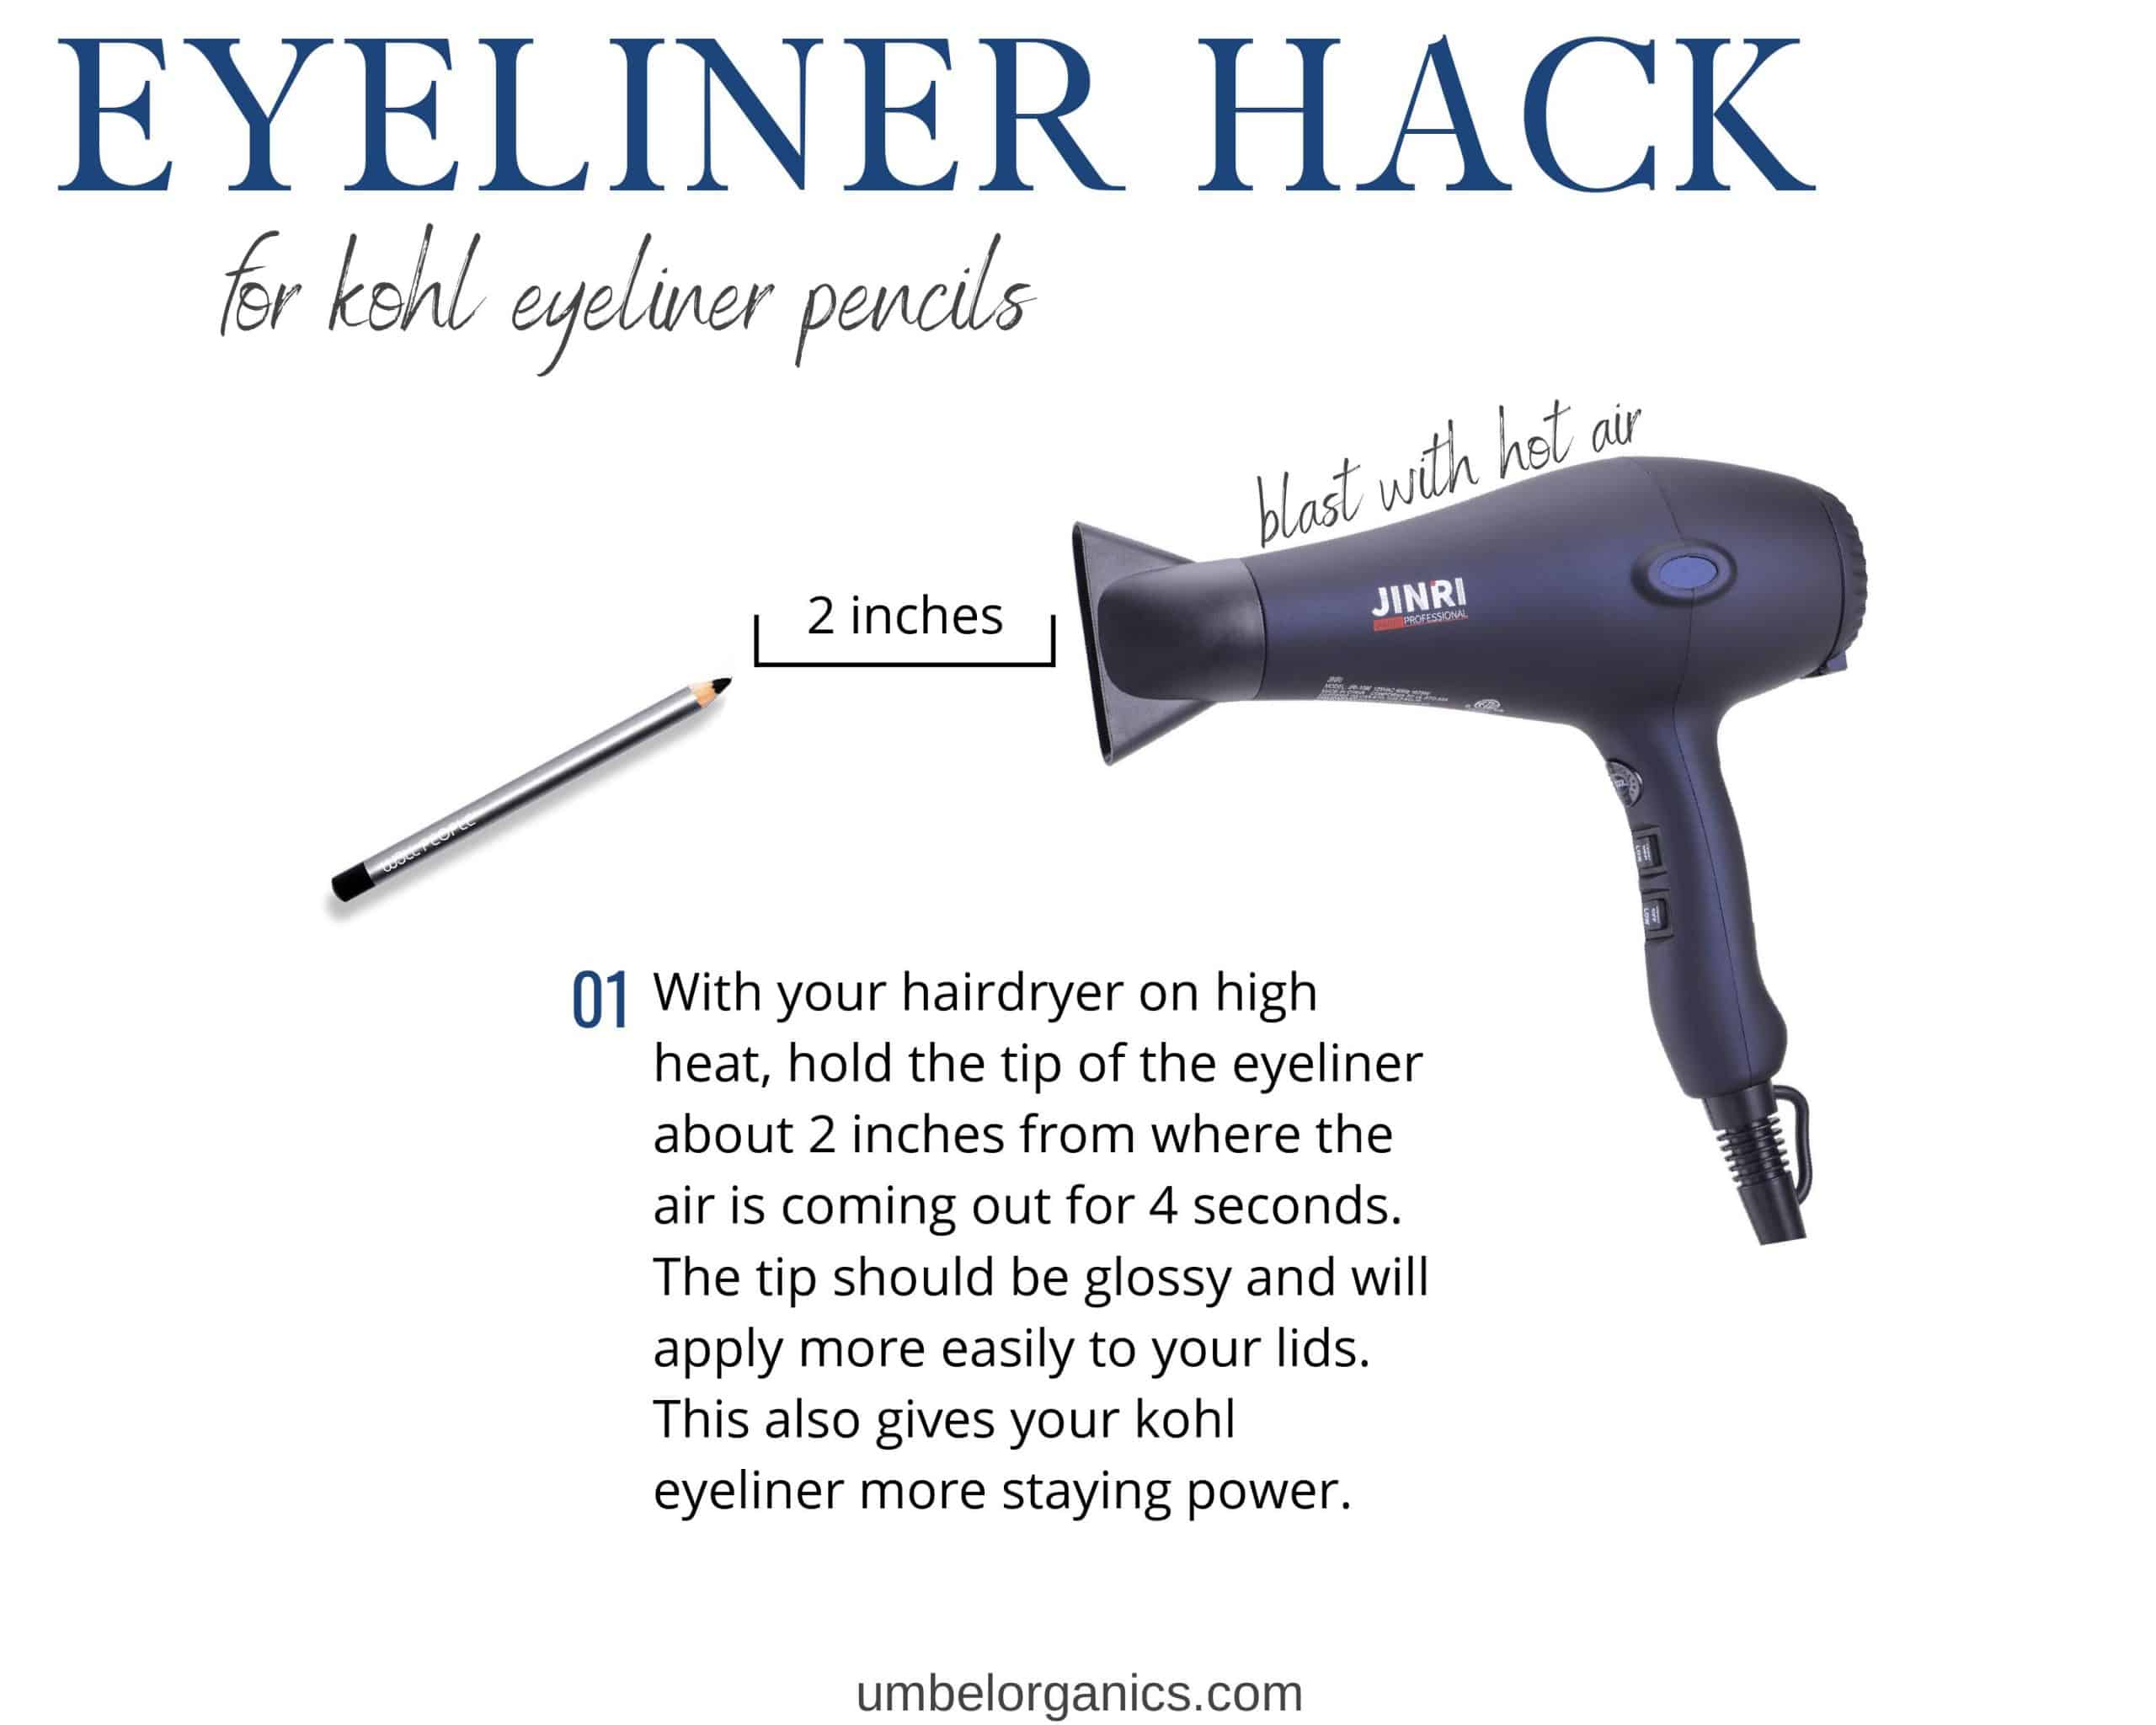 Heat up eyeliner with hair dryer to apply easier